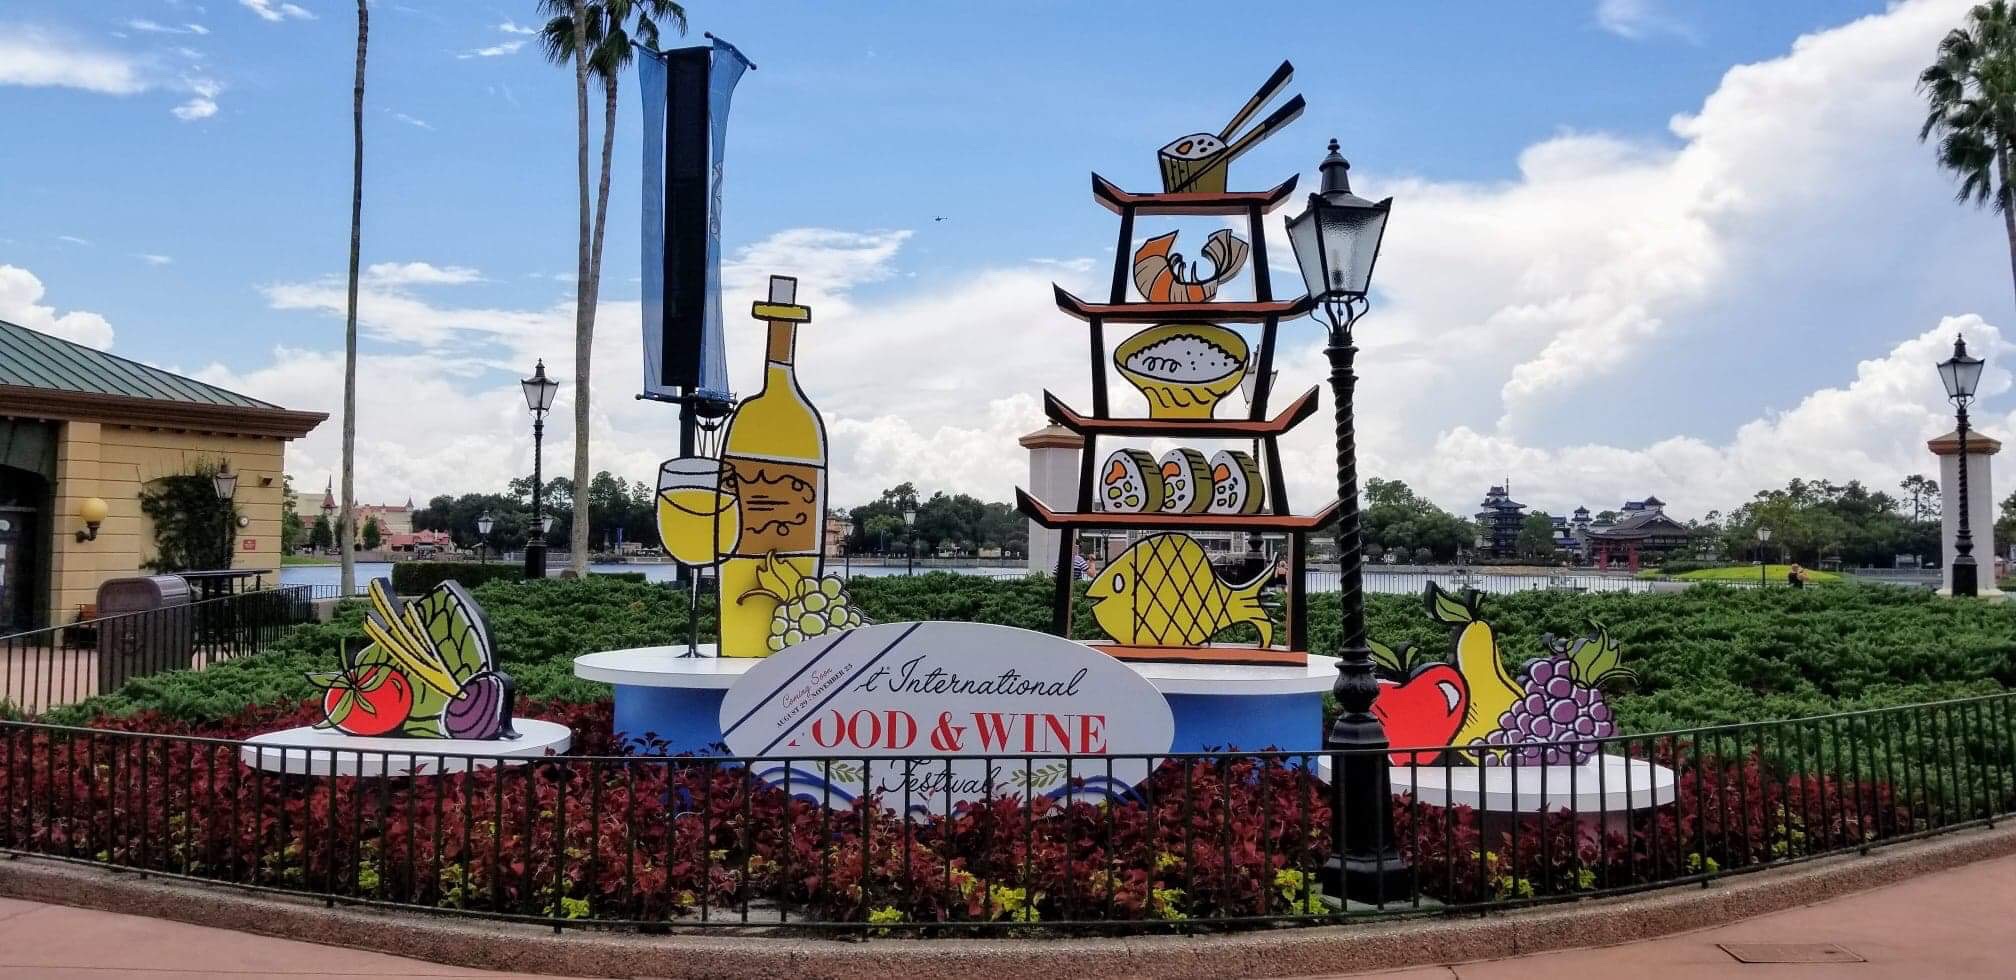 Special Merchandise Events During Epcot Food and Wine Festival